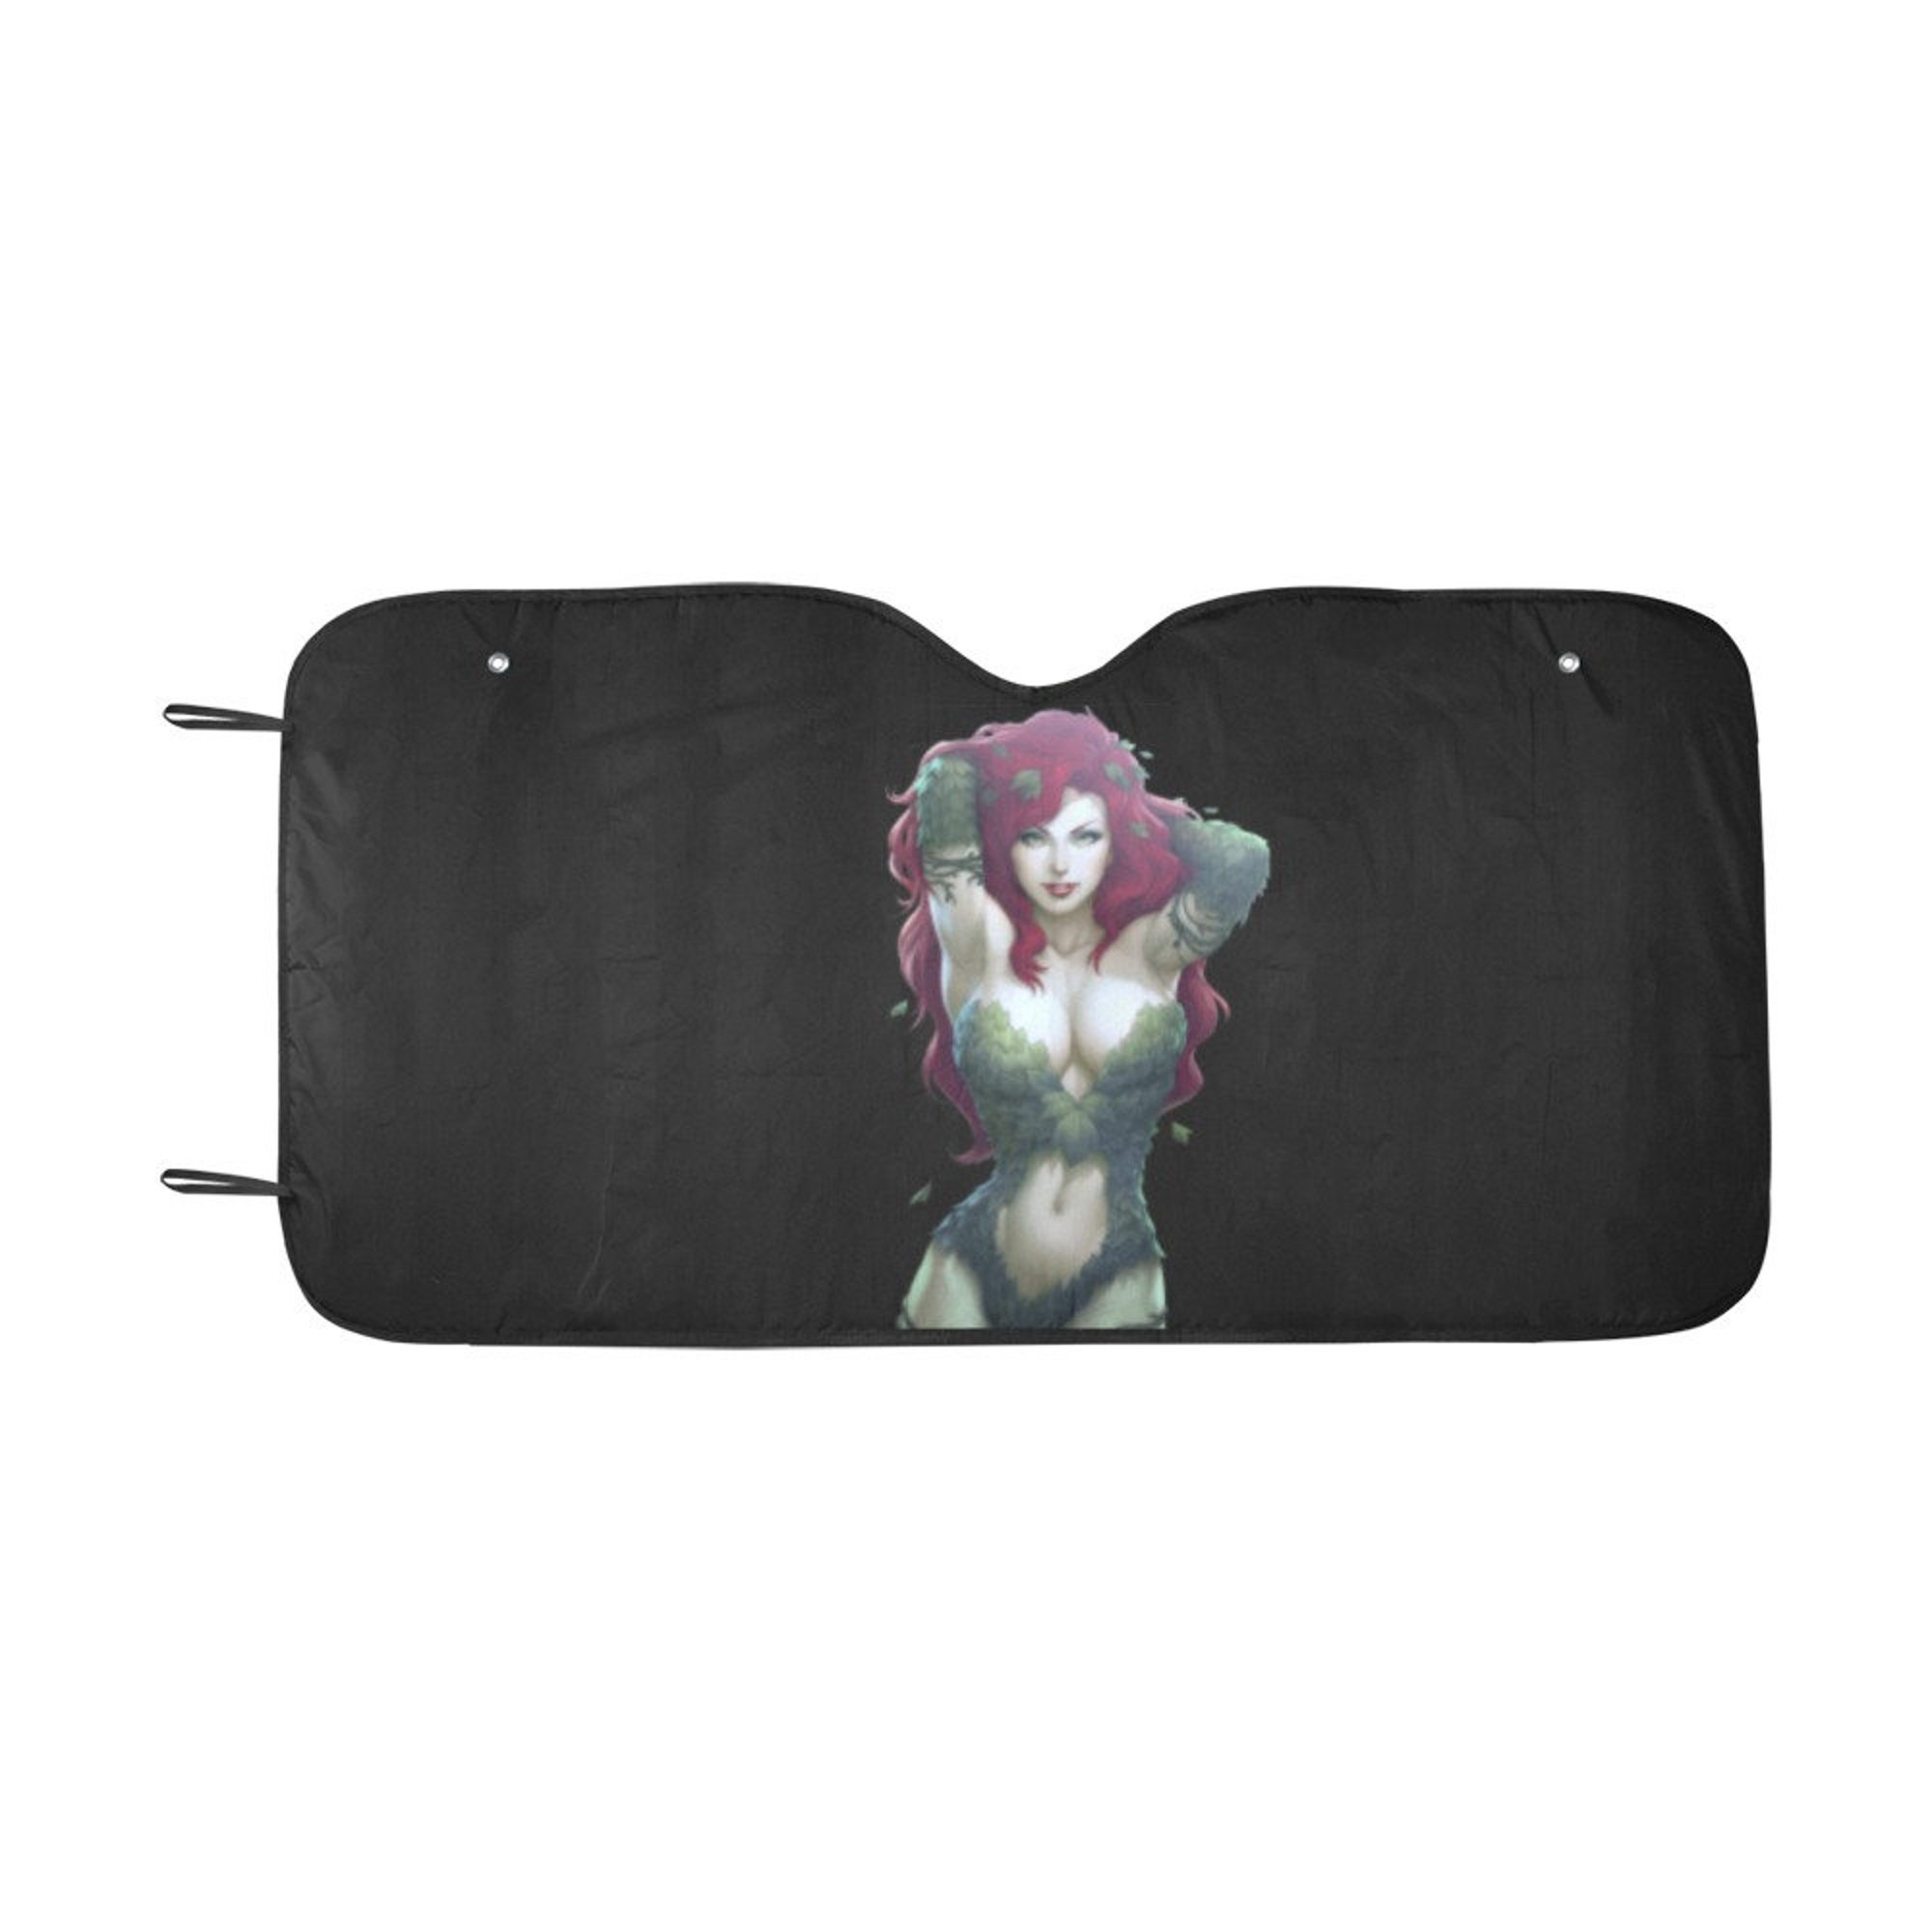 Discover Poison Ivy Car Sun Shade Cover Travelling Birthday